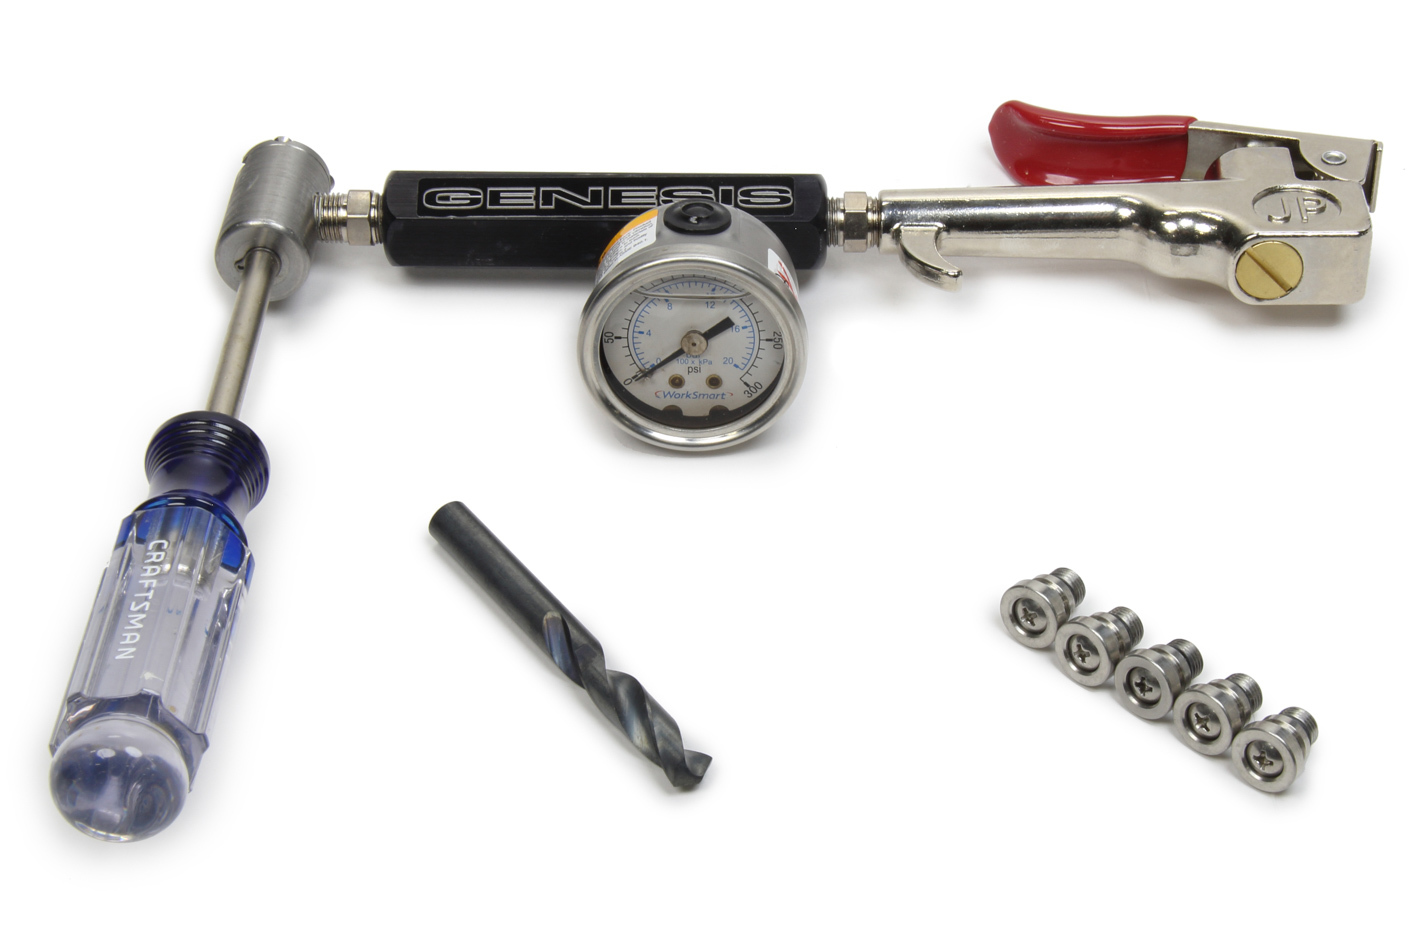 Wrenches Pacific Customs Fox Shock Rebuild Tool Kit with Nitrogen Fill Kit and Shaft Bullets 